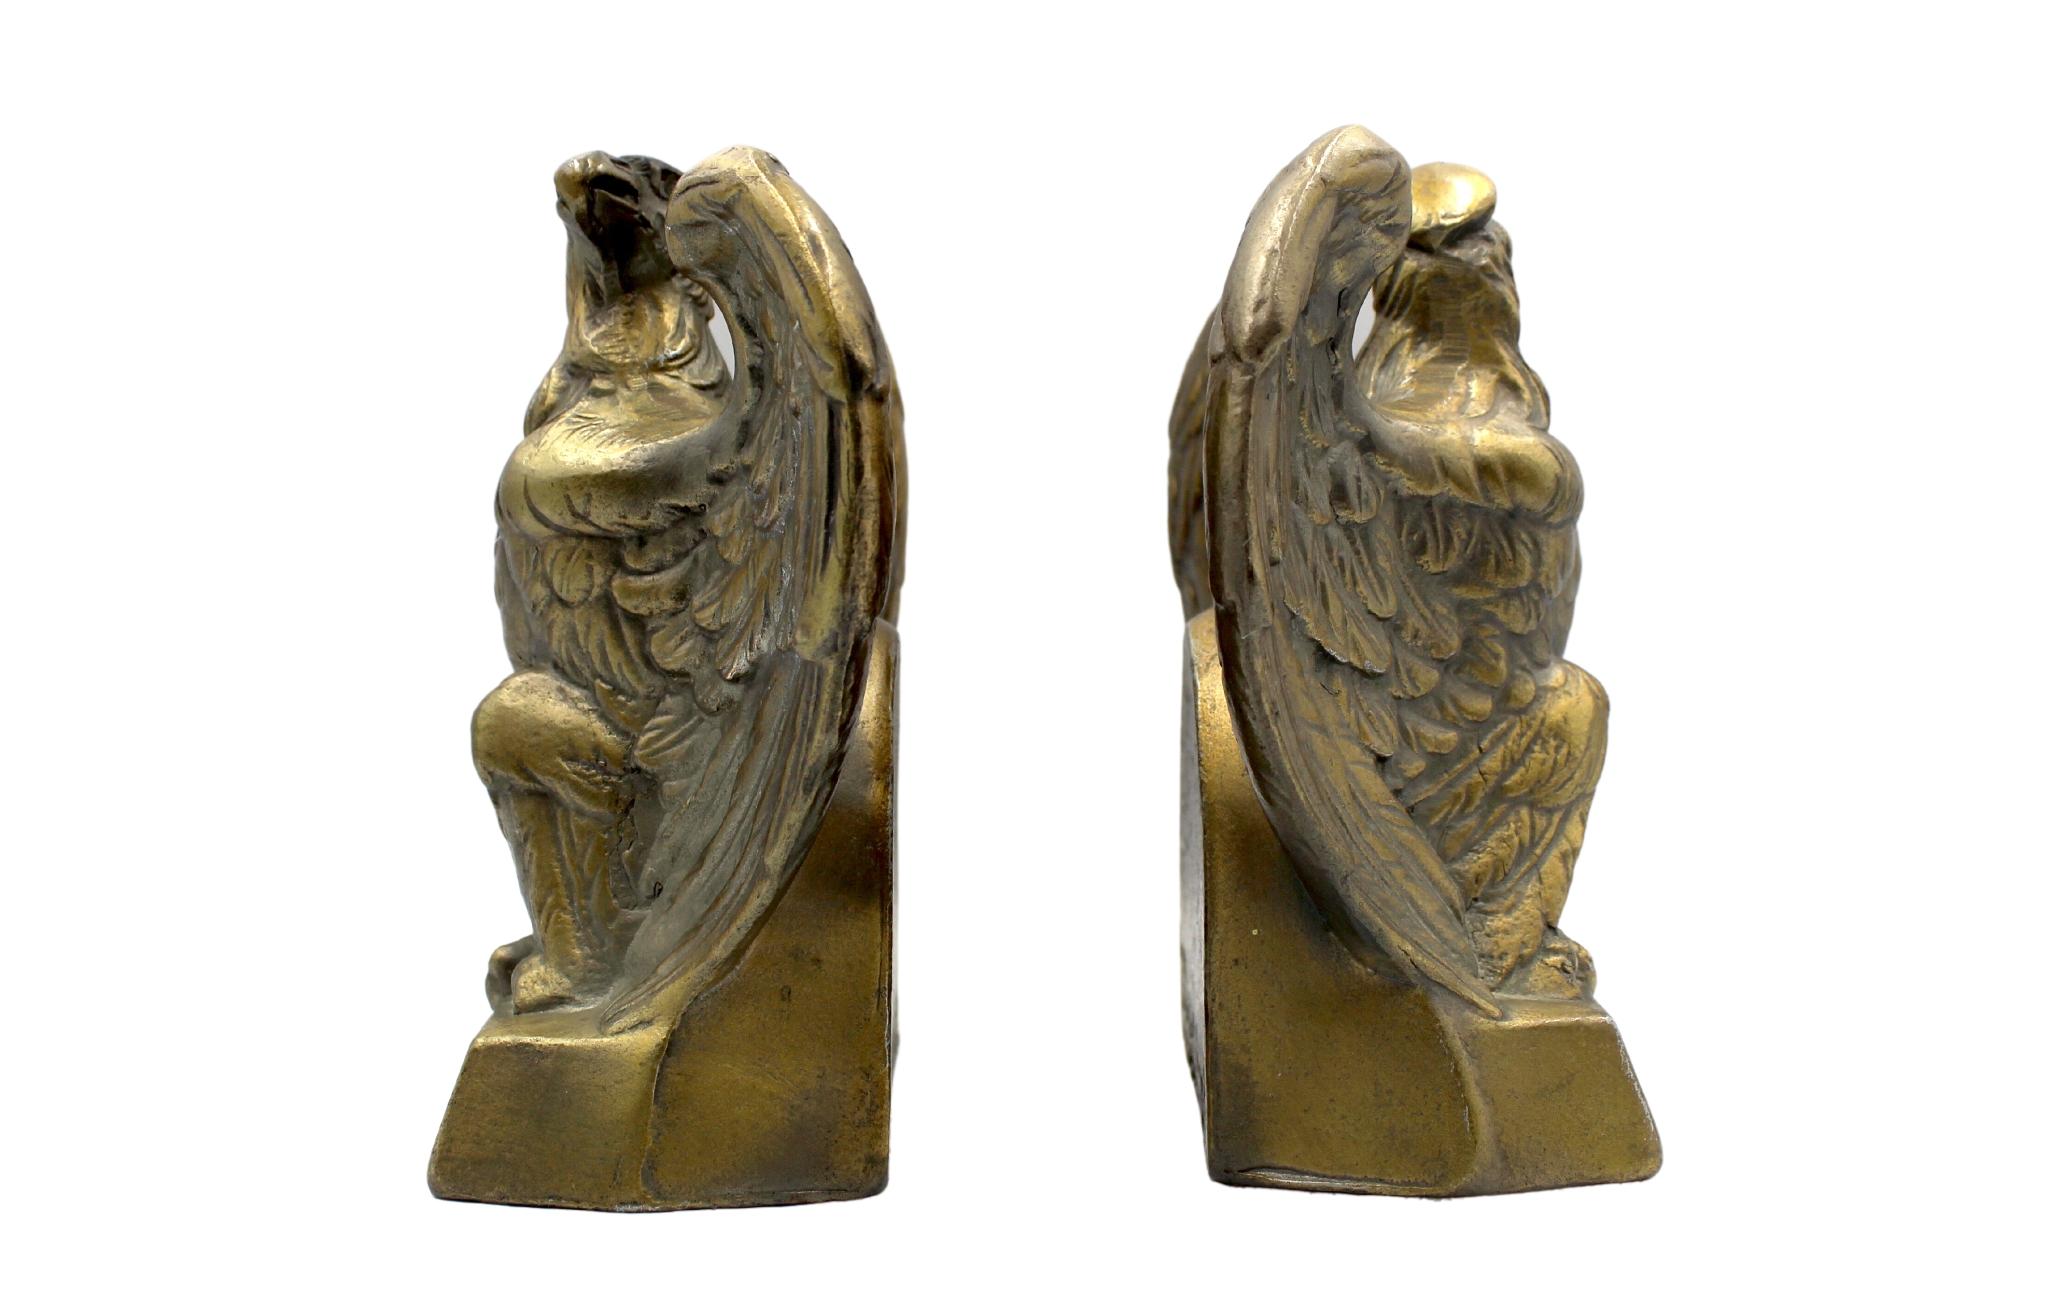 These appealing vintage brass bookends depict a spread-wing bald eagle perched on a rectangular base. The base is stamped with the date “1776.” The bookends were made by Colonial Virginia, a crafter working out of Hampton, Virginia in 1972. The